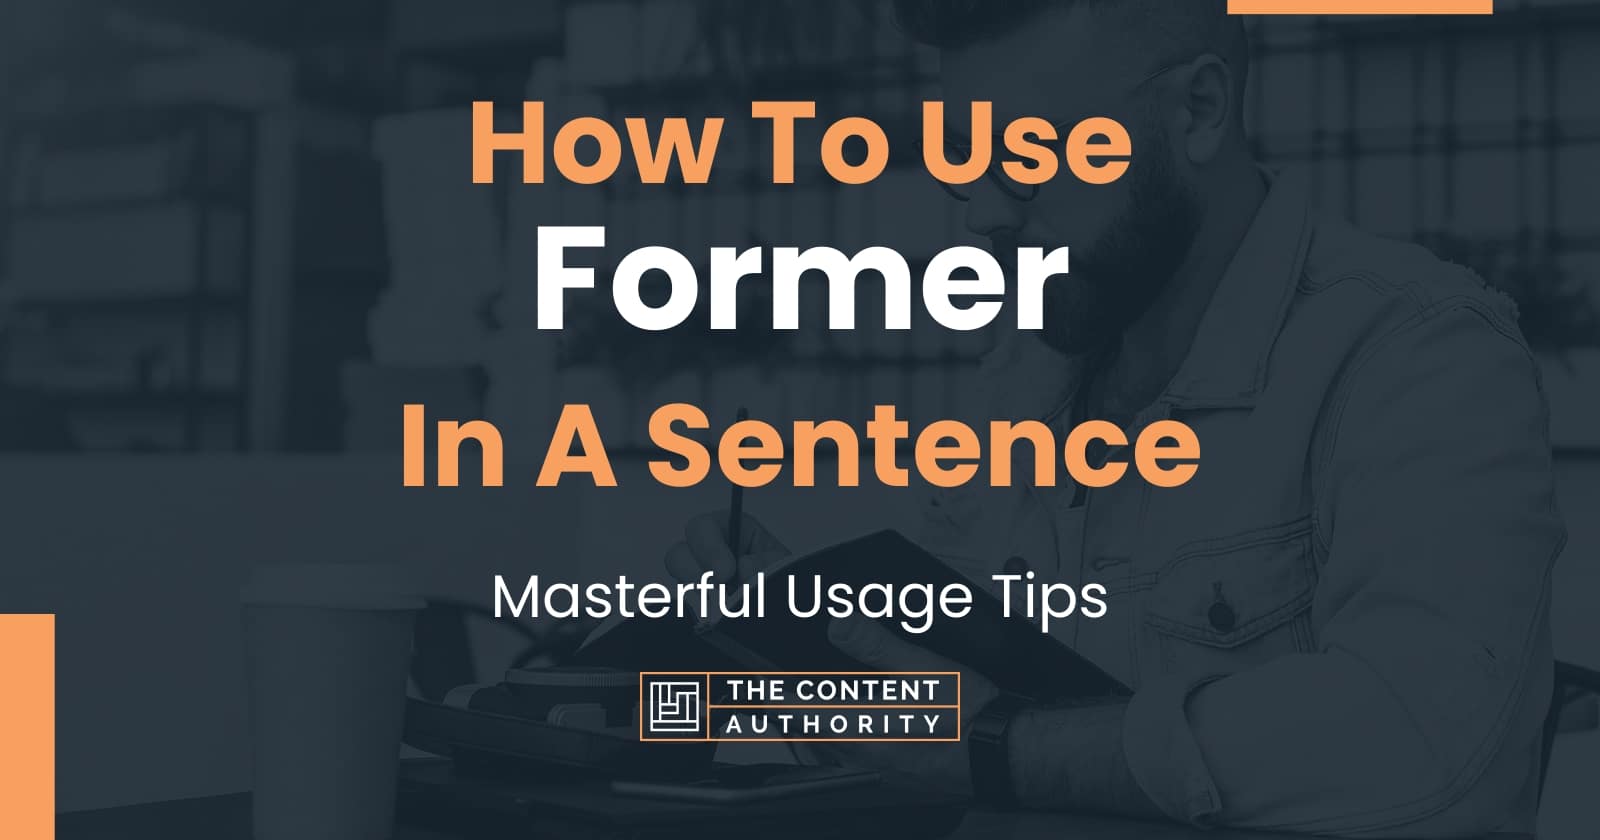 How To Use Former In A Sentence Masterful Usage Tips